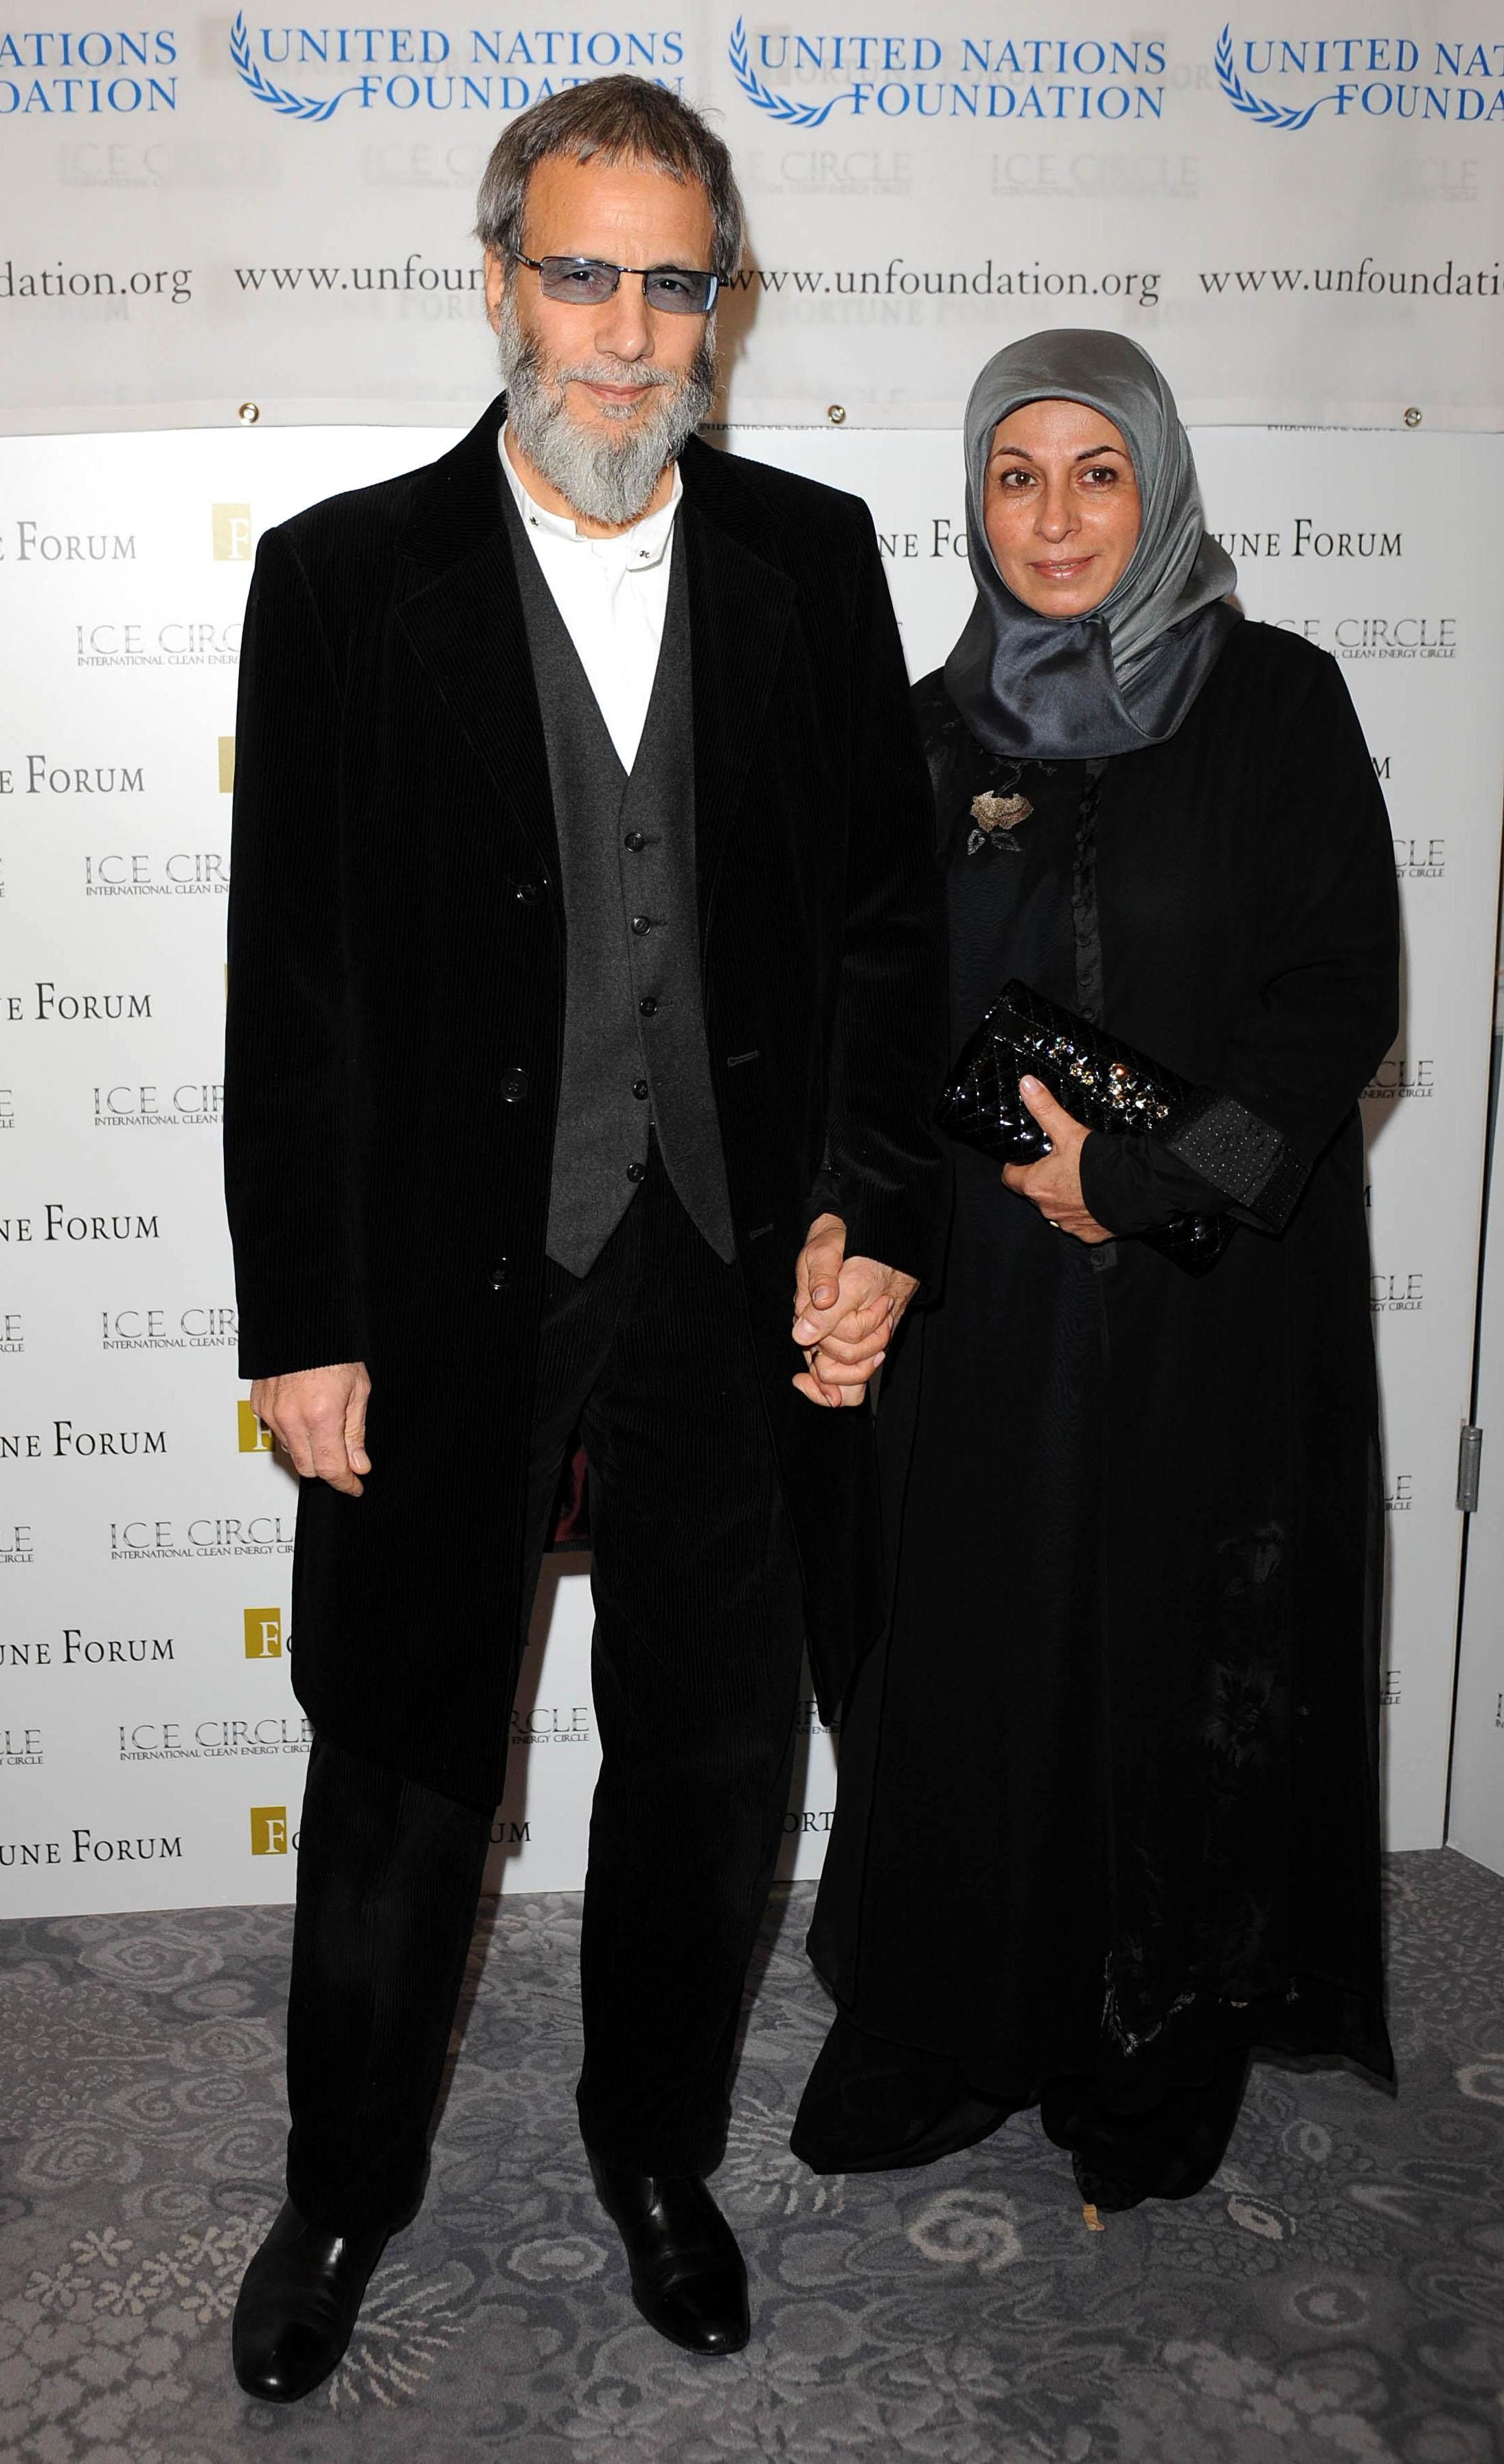 Yusuf and Fauzia Mubarak Ali arriving at the Fortune Forum Summit at the Dorchester Hotel, London, on March 3, 2009. | Source: Getty Images